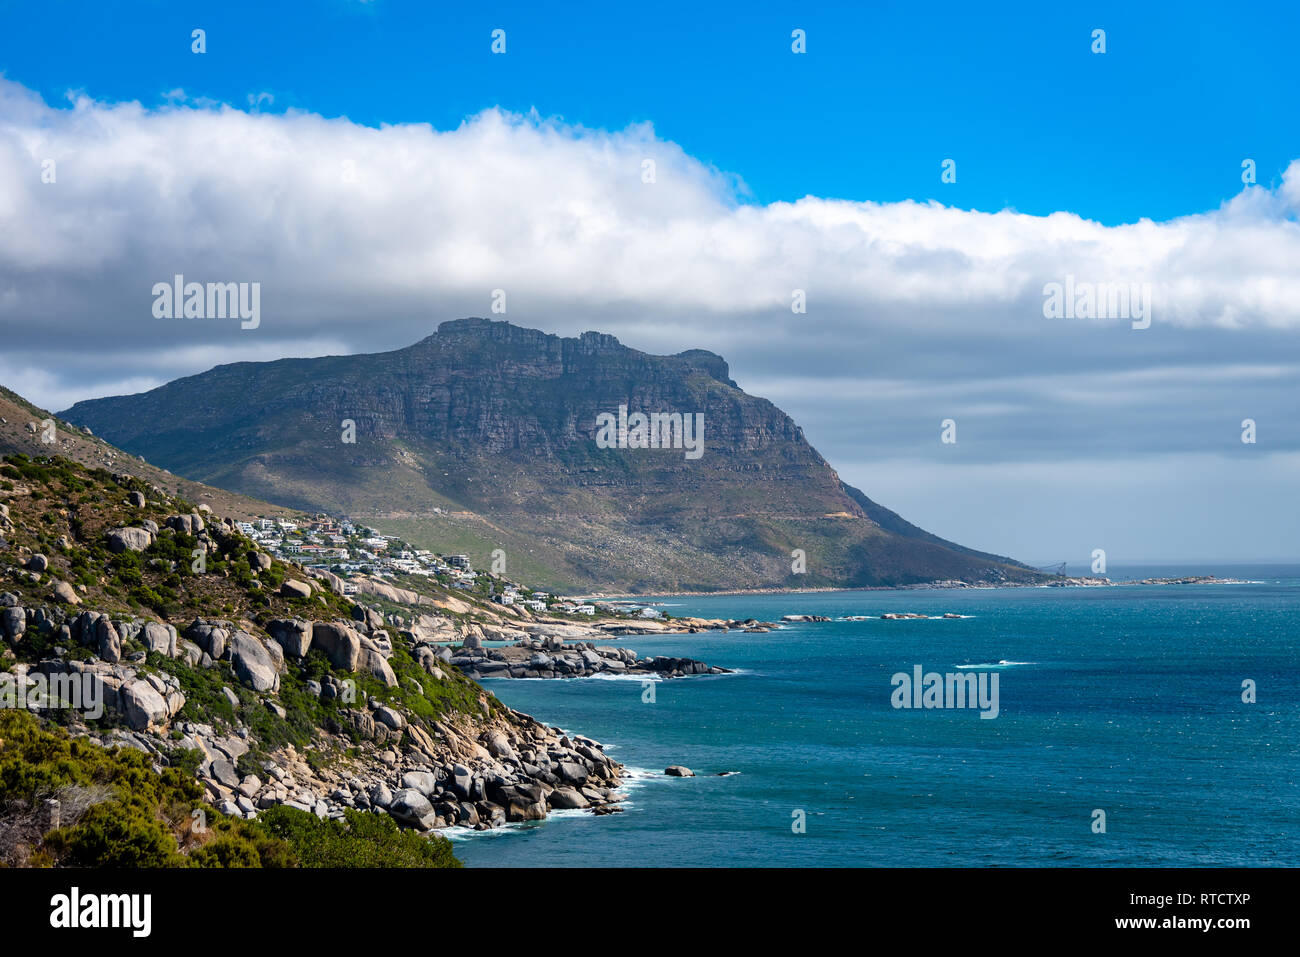 The shoreline in Cape Town, South Africa Stock Photo